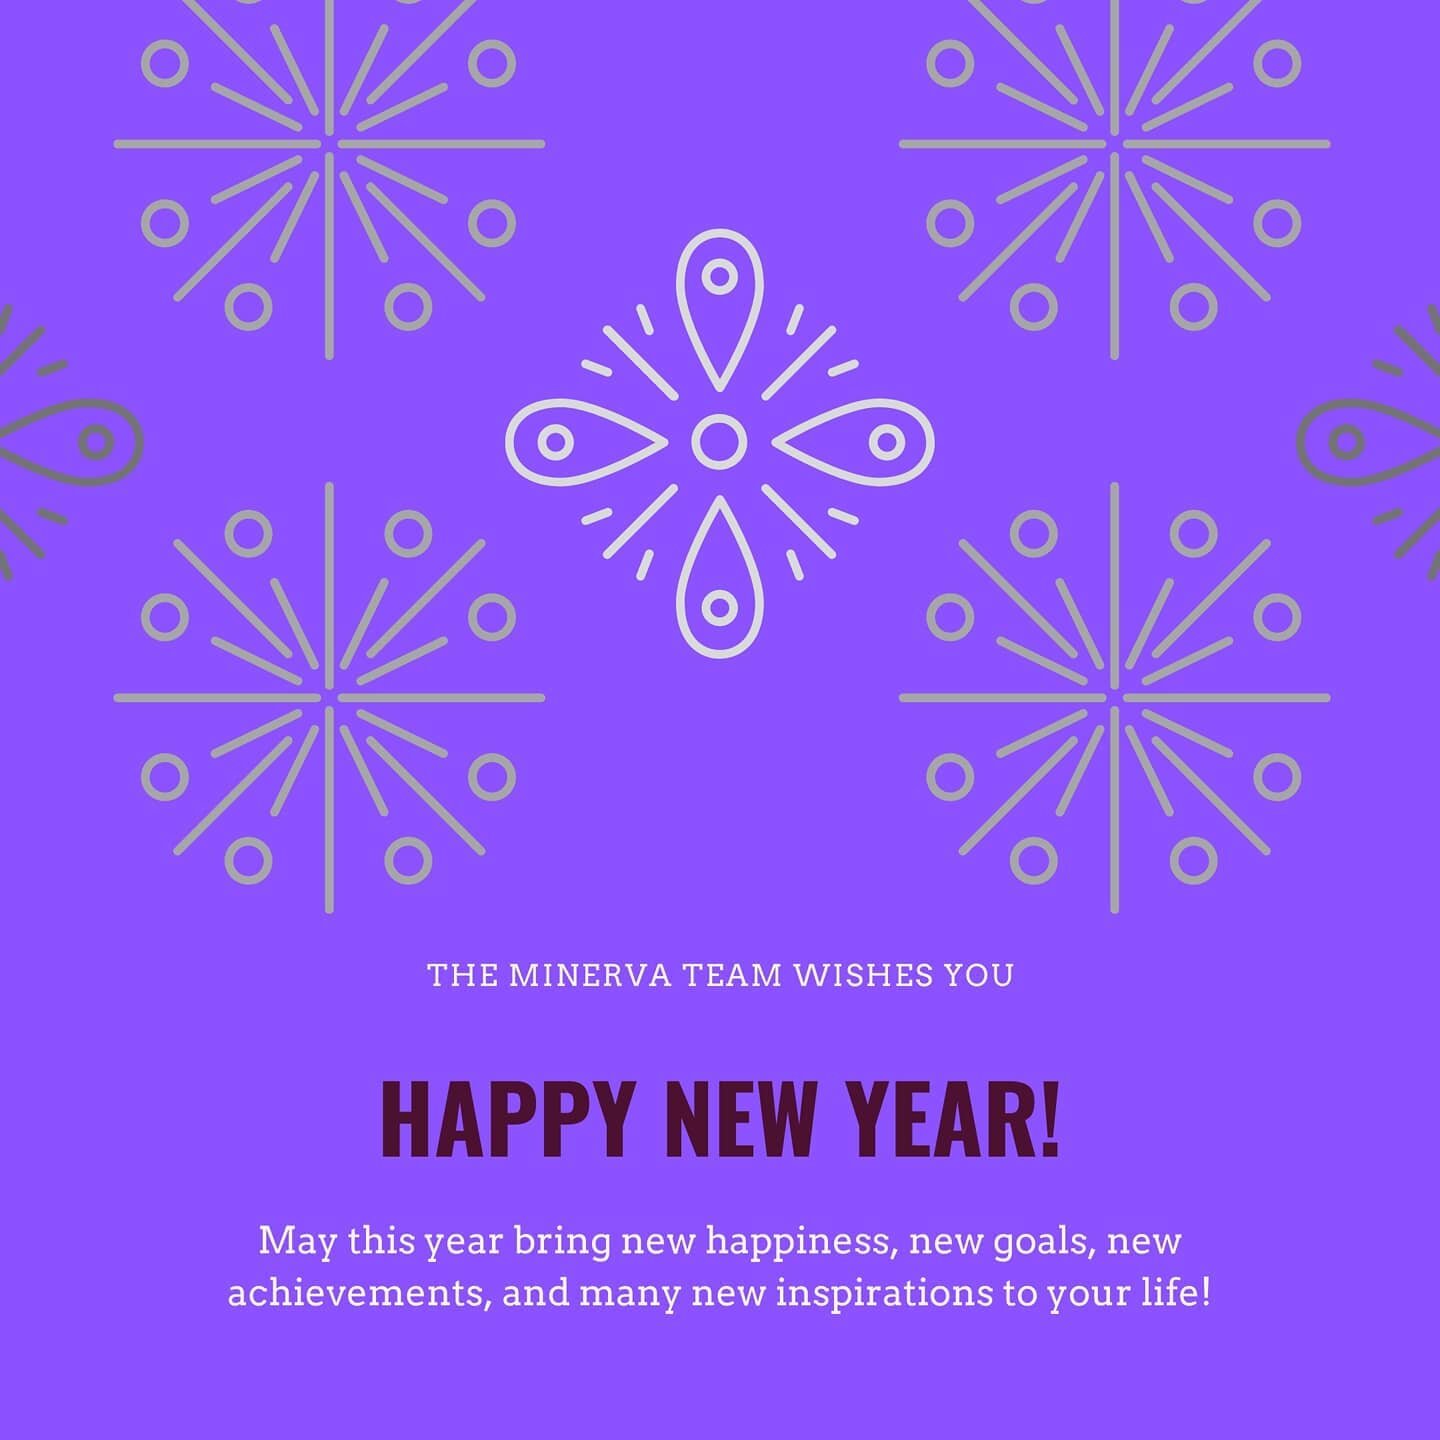 Wishing you all a very Happy New Year from the Minerva team!
.
.
#2021 #happynewyear #minervafunds #impactinvest #happiness #goals #achievements #inspirations